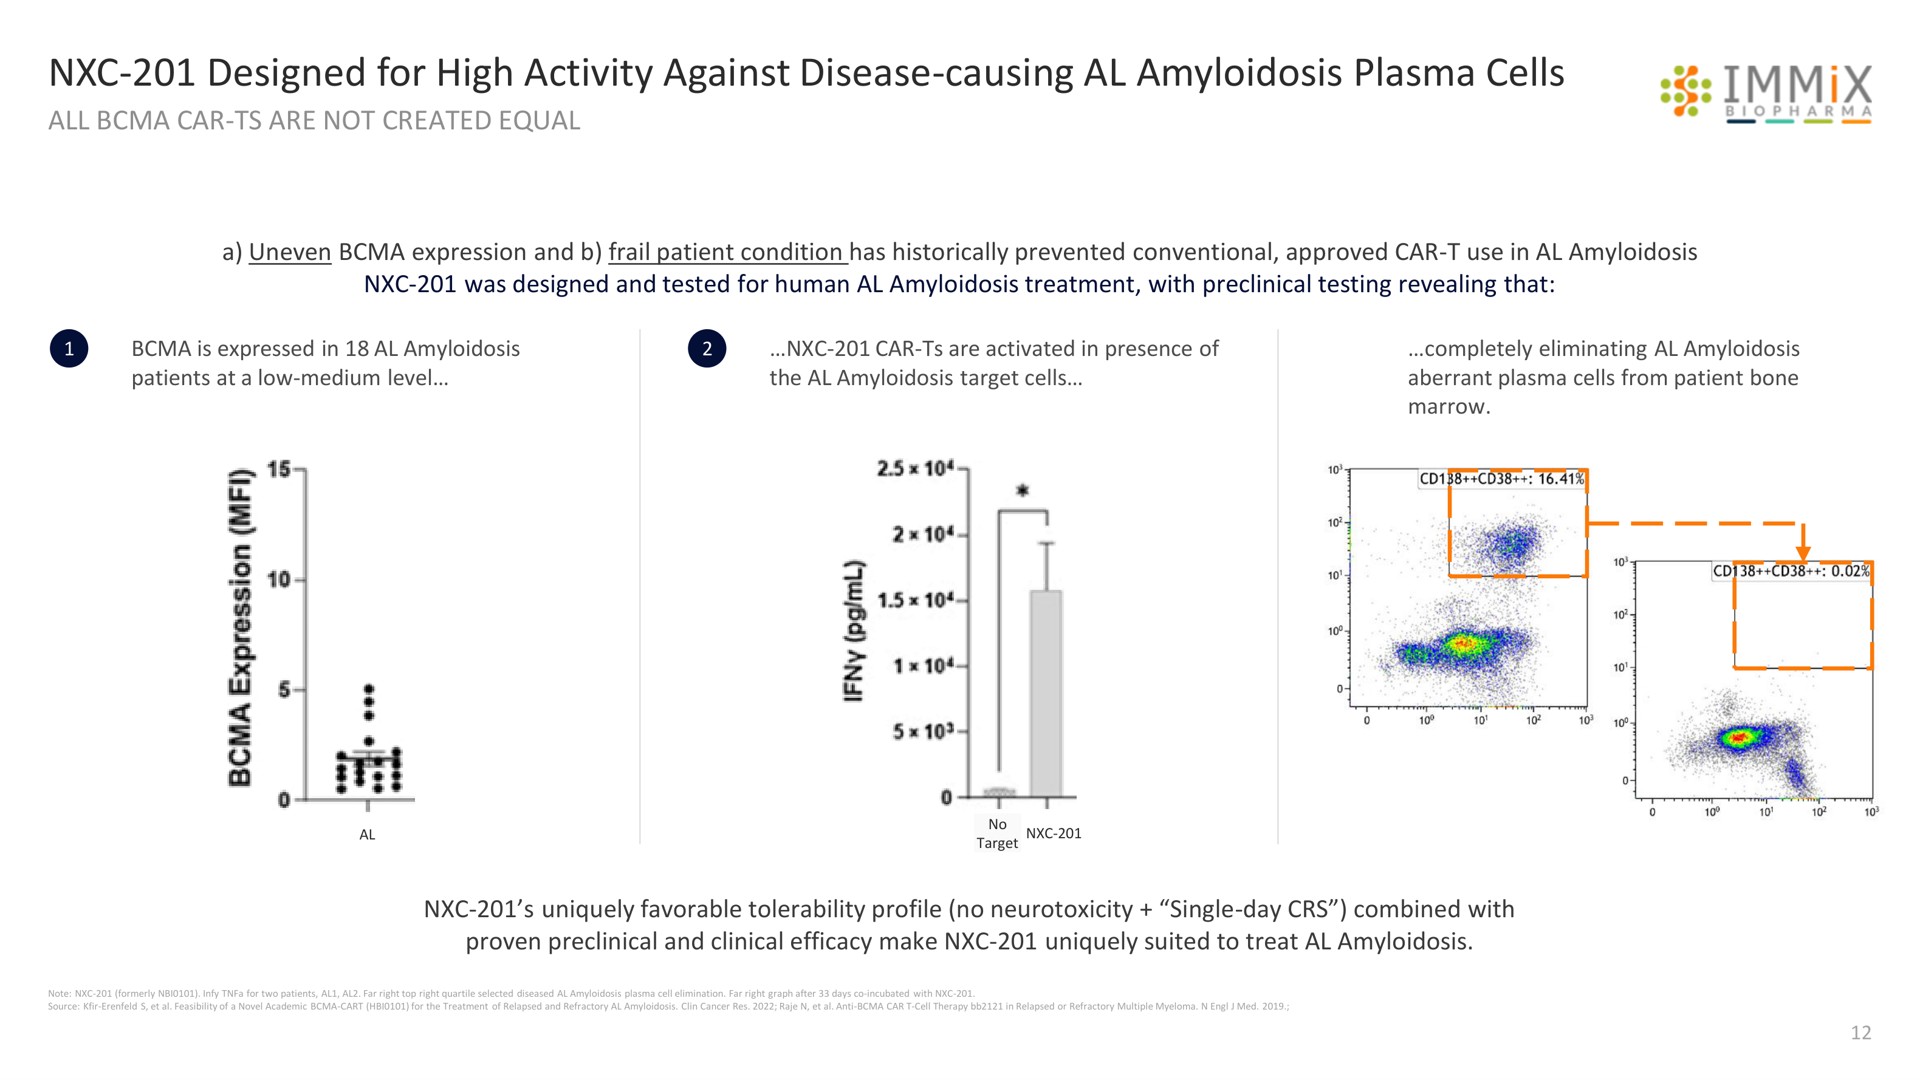 designed for high activity against disease causing amyloidosis plasma cells | Immix Biopharma